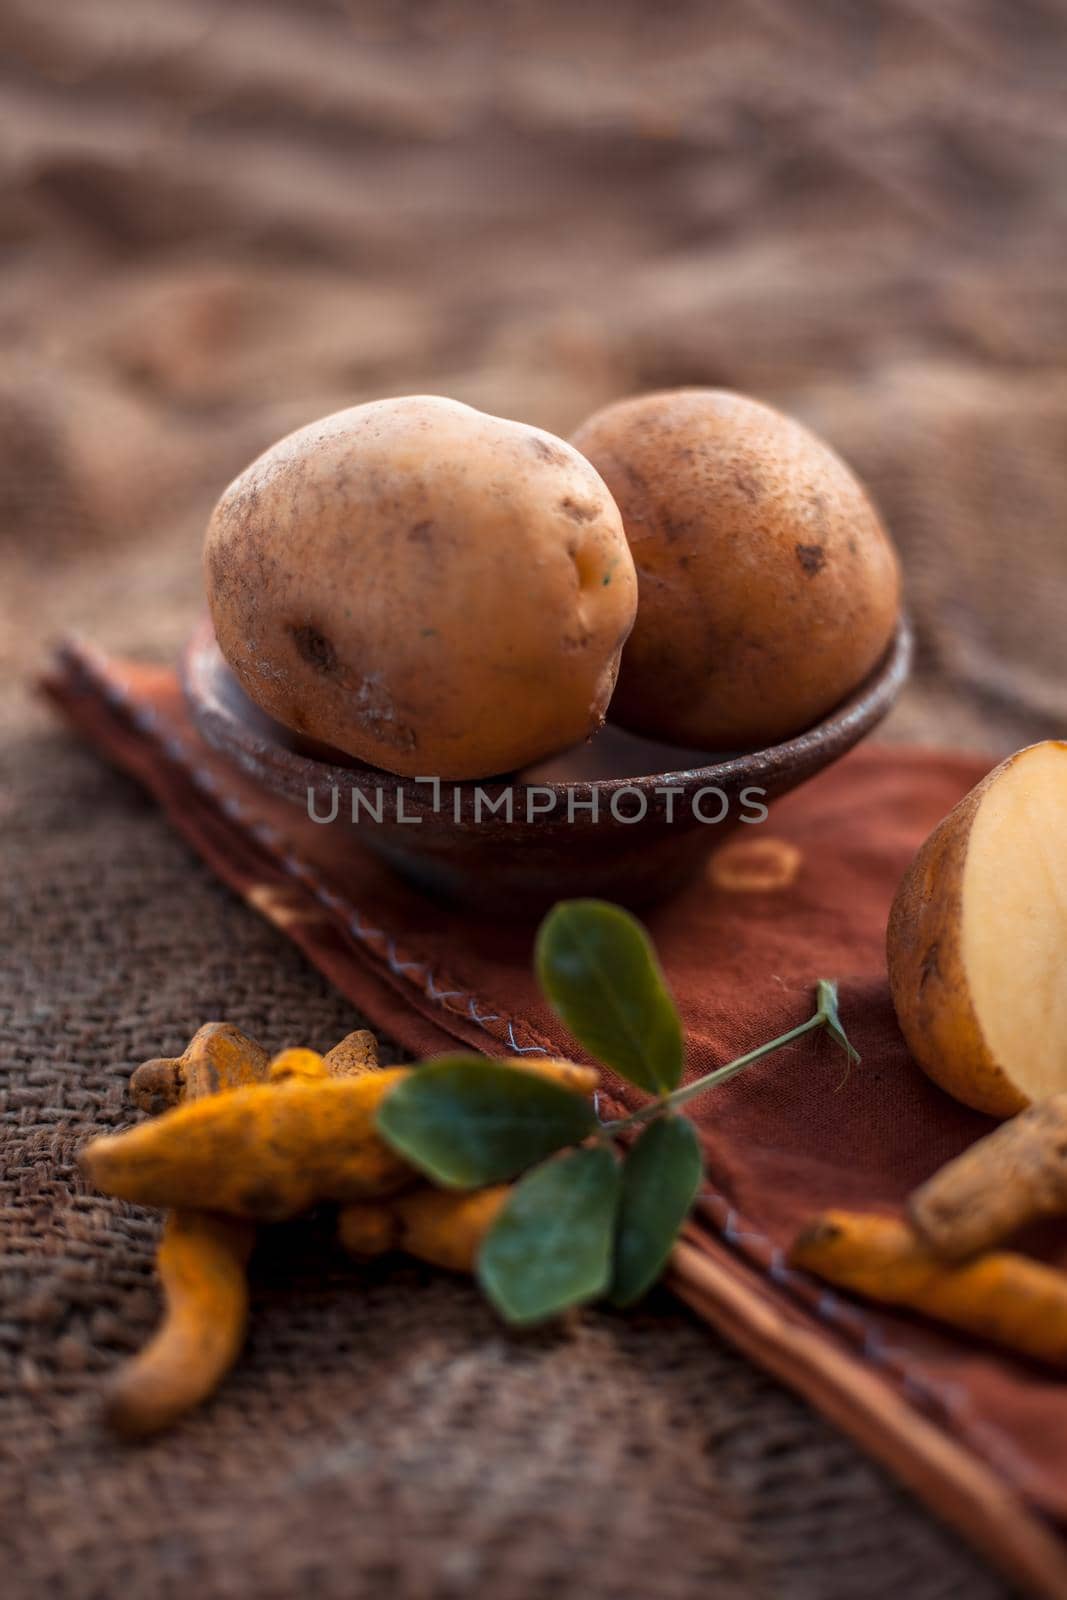 Potato face mask consisting of grated potato and some turmeric powder or haldi in a glass bowl on jute bags surface to brighten the skin, kills bacteria and germs. by mirzamlk